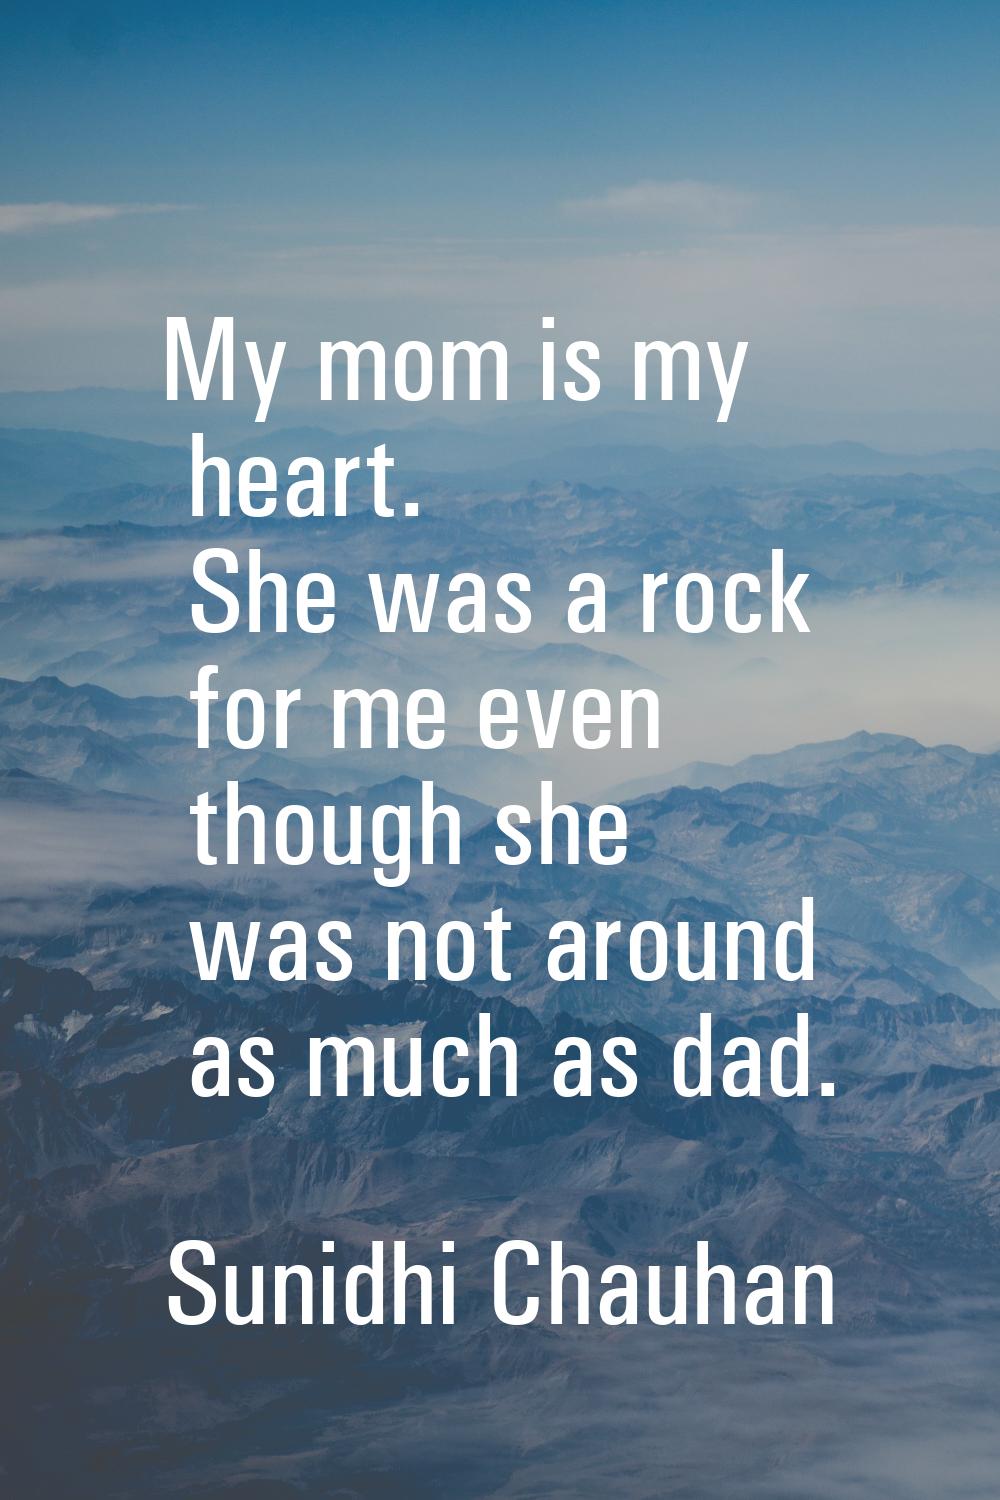 My mom is my heart. She was a rock for me even though she was not around as much as dad.